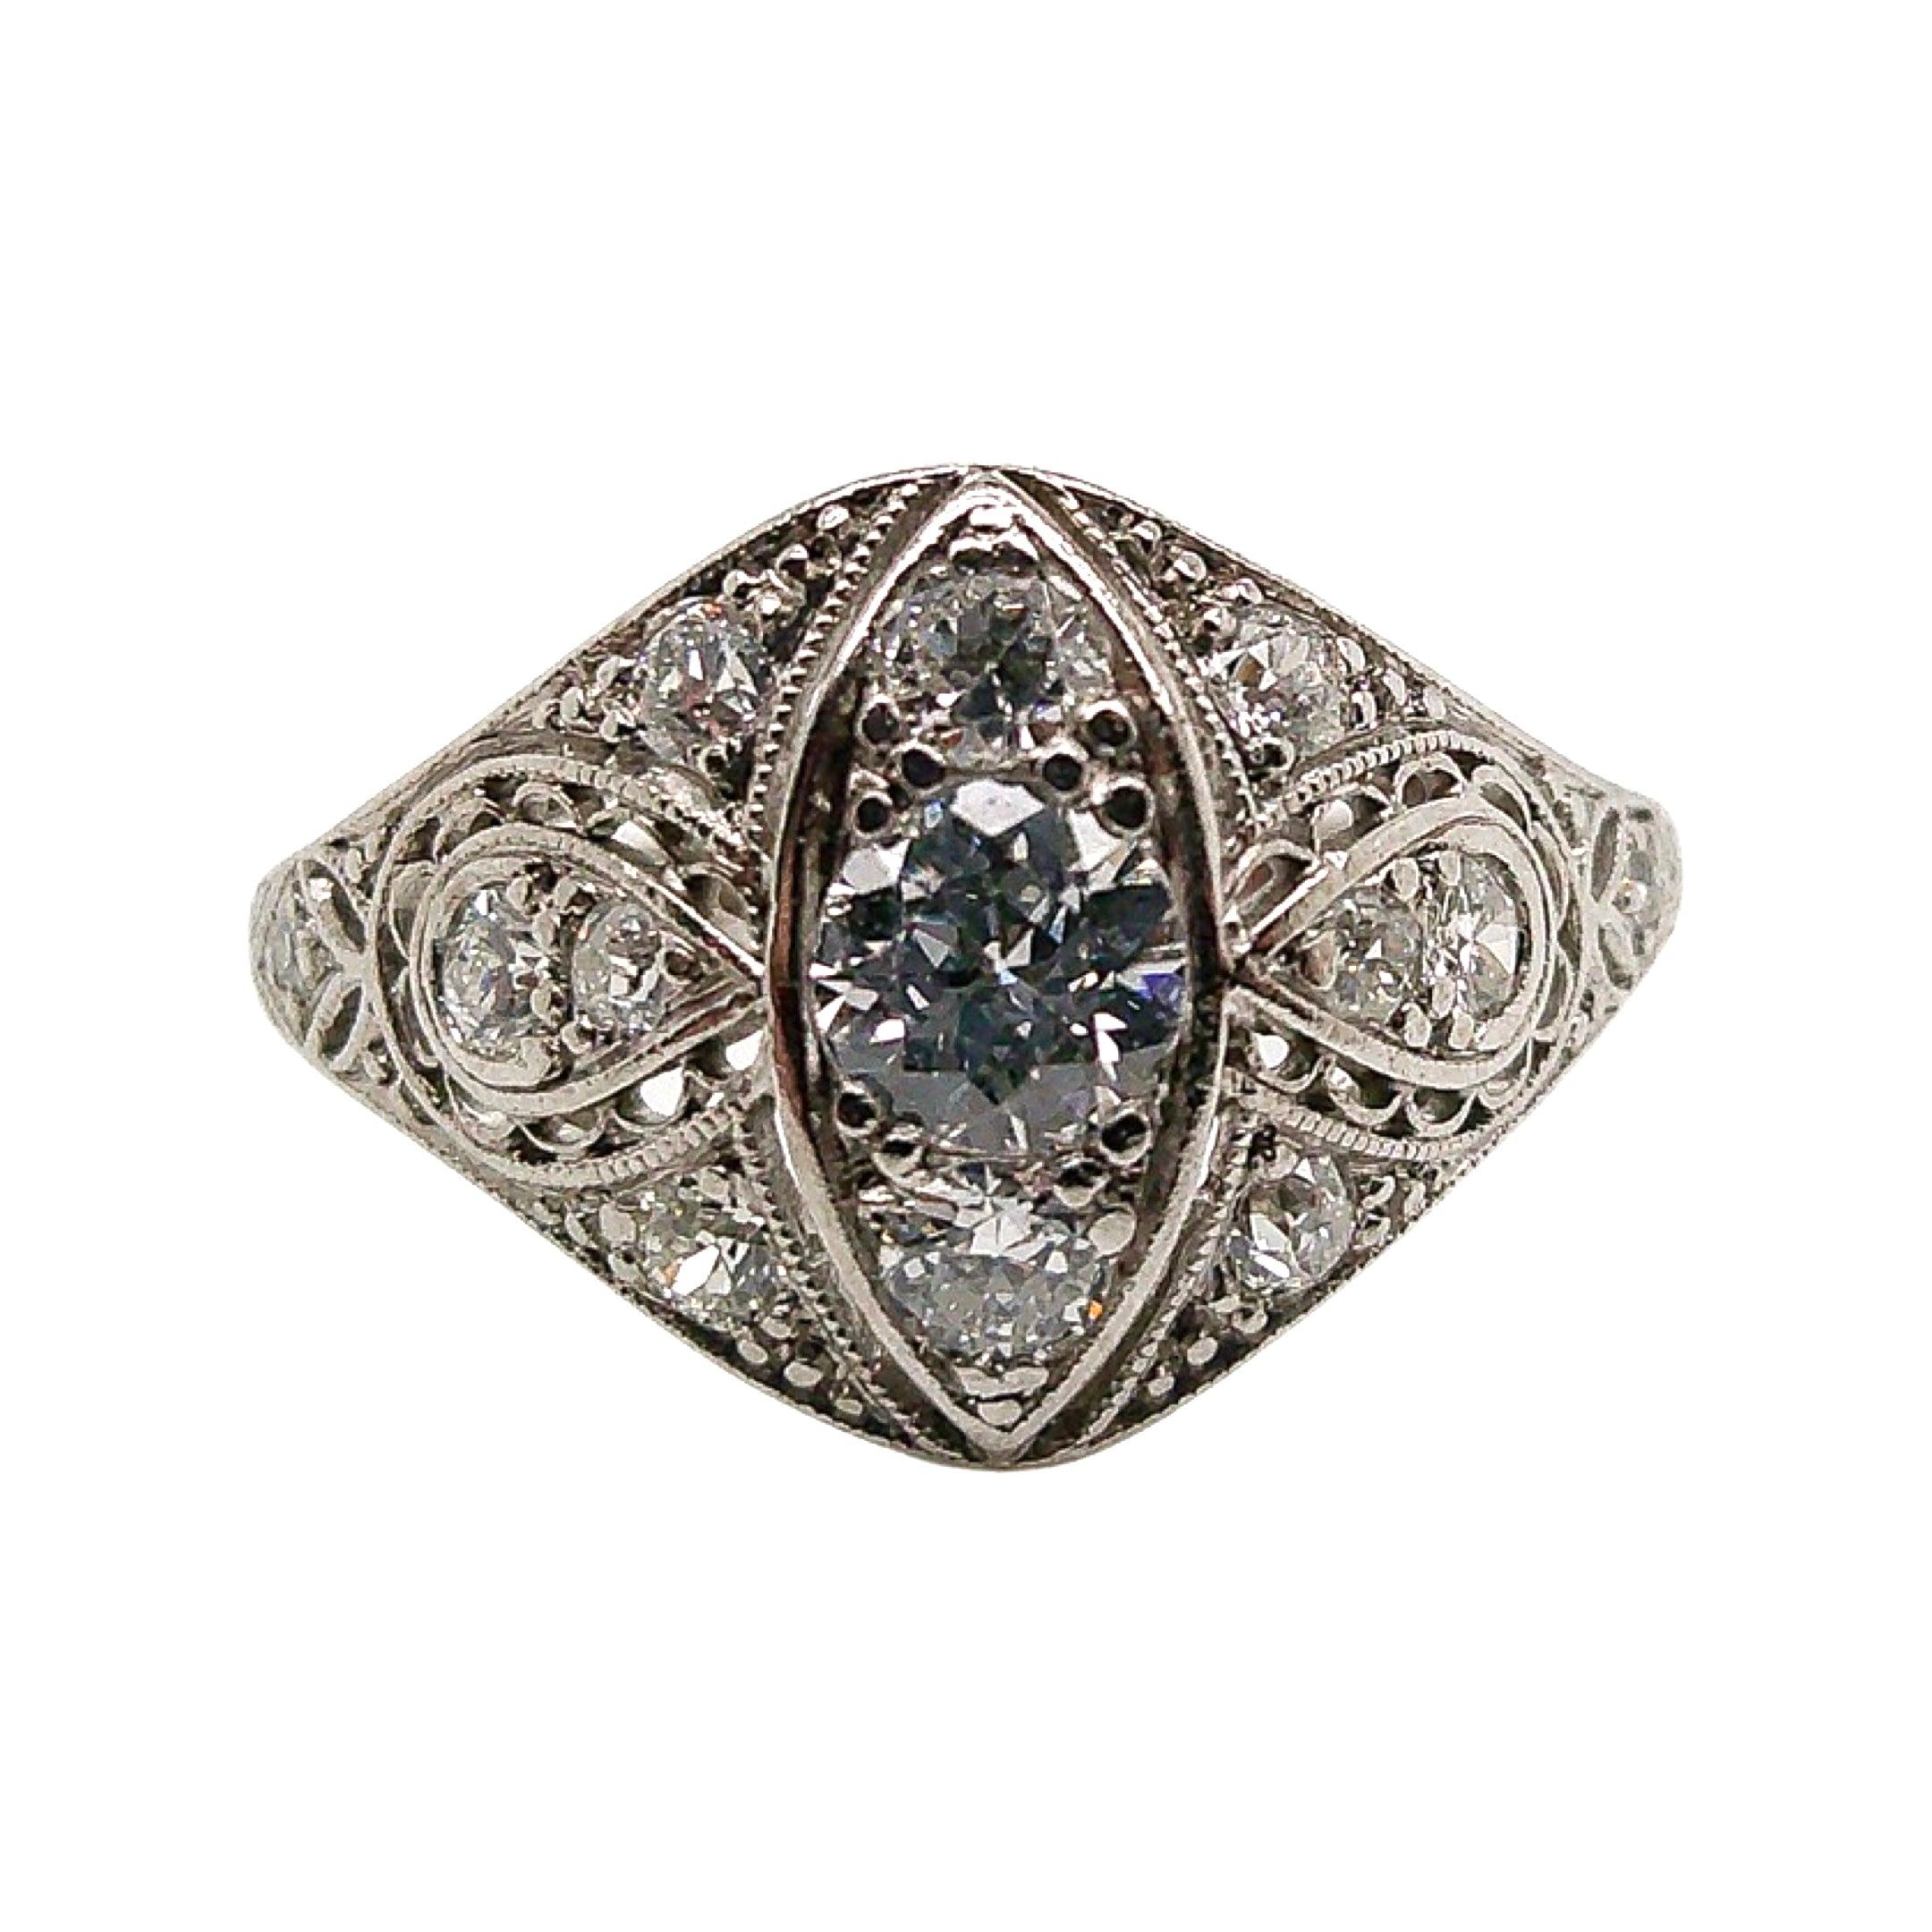 This antique piece was handcrafted sometime during the Edwardian design period (1900-1920). Delicately crafted in exquisite platinum, this whimsical ring captures the essence of the Edwardian period with its timeless beauty and intricate details.
